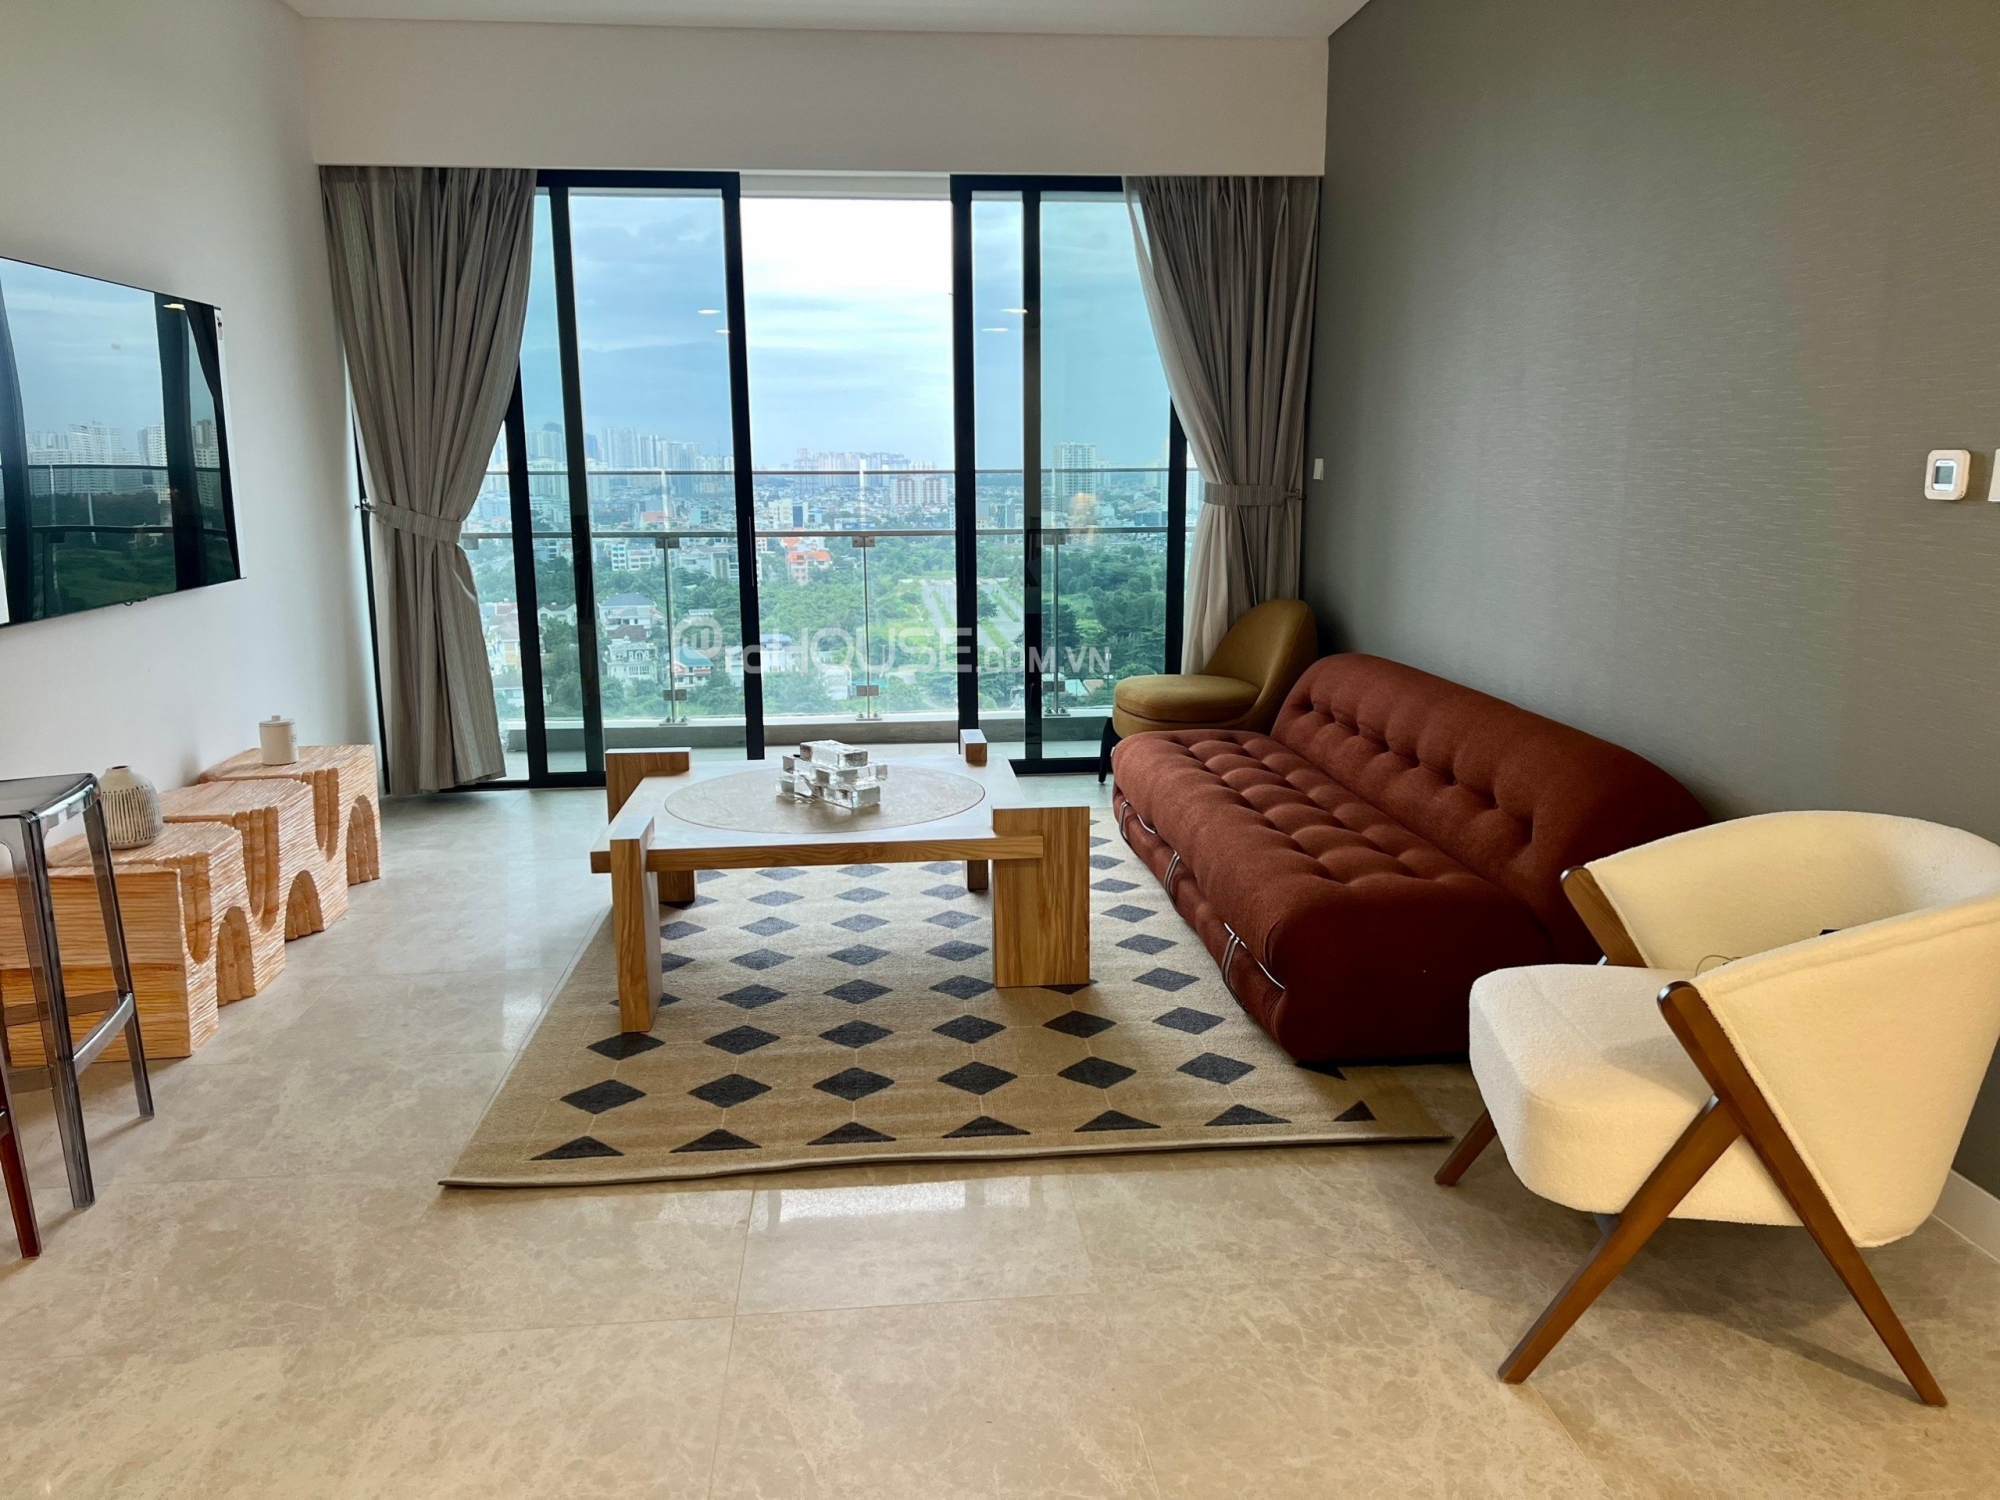 3 bedroom apartment for rent in The River Thu Thiem with beautiful view